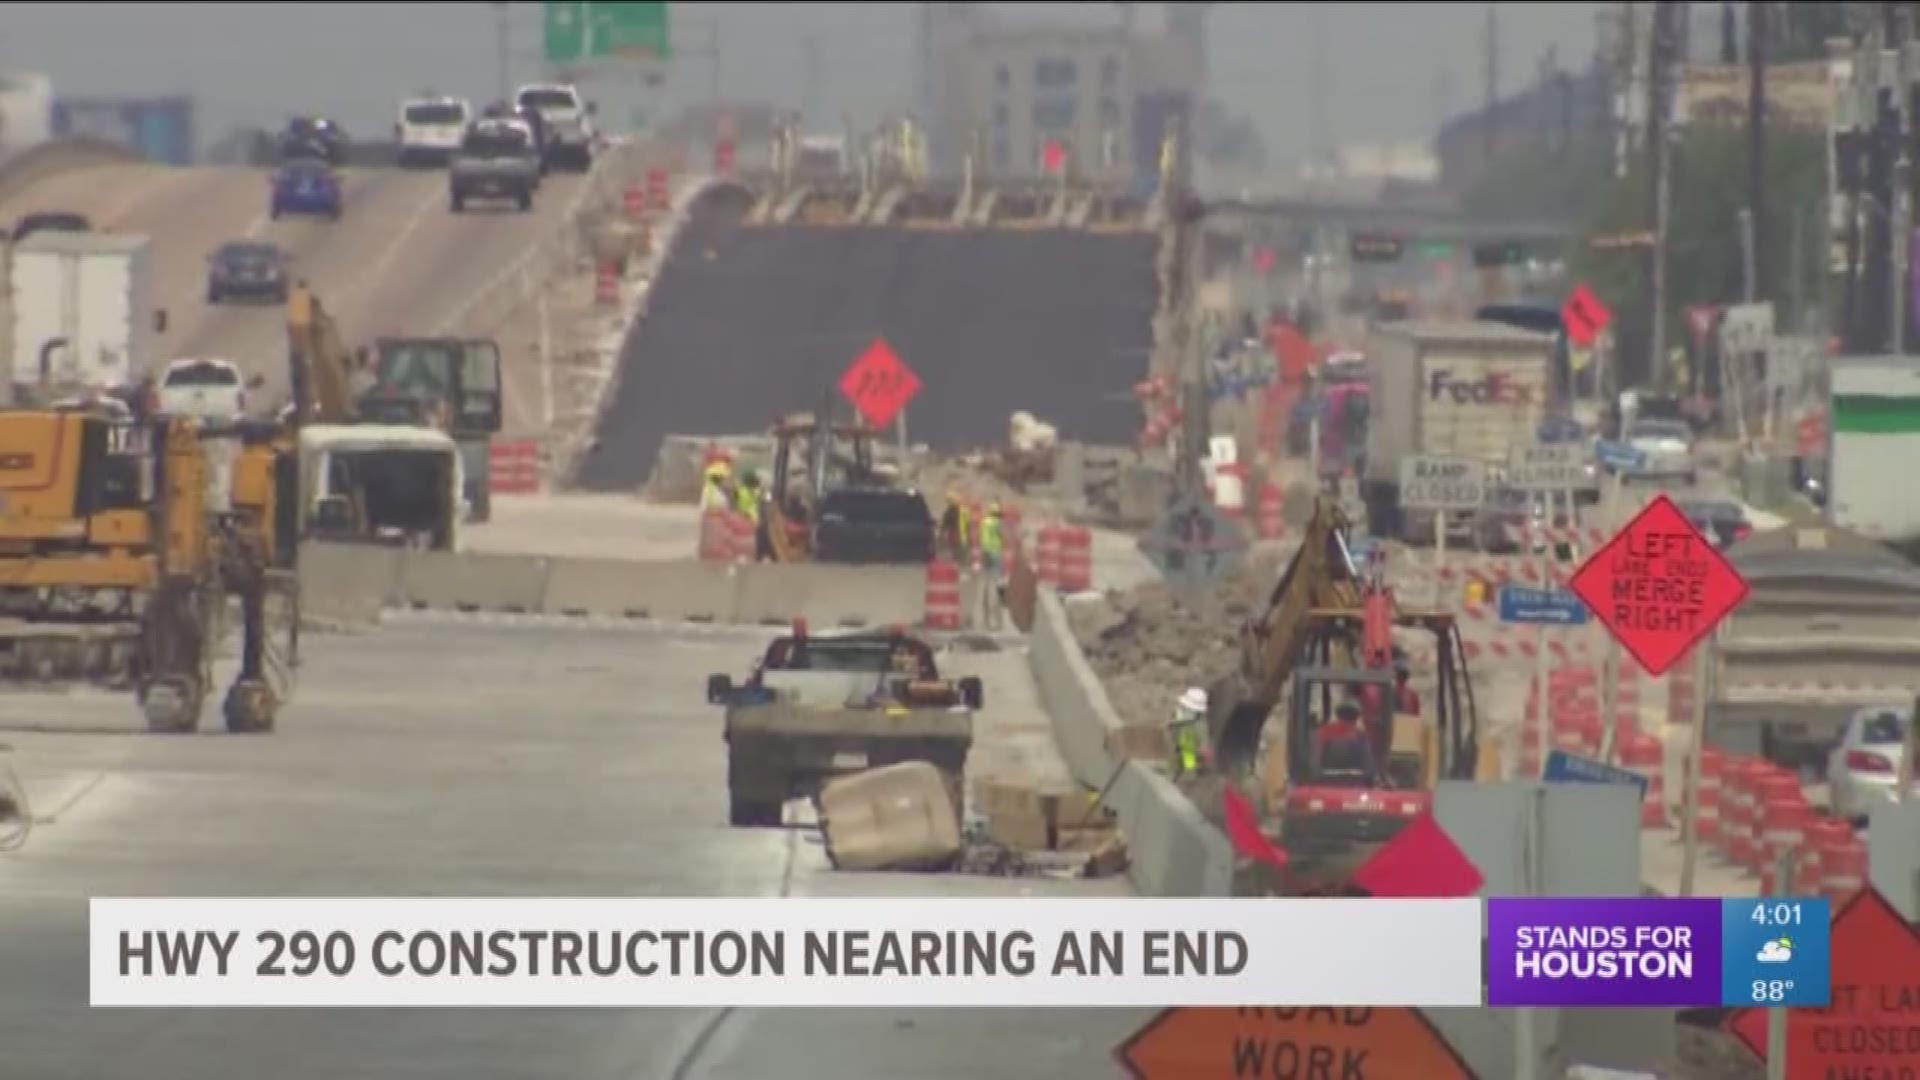 After nearly ten years. road construction on Highway 290 is nearing an end, officials said. 